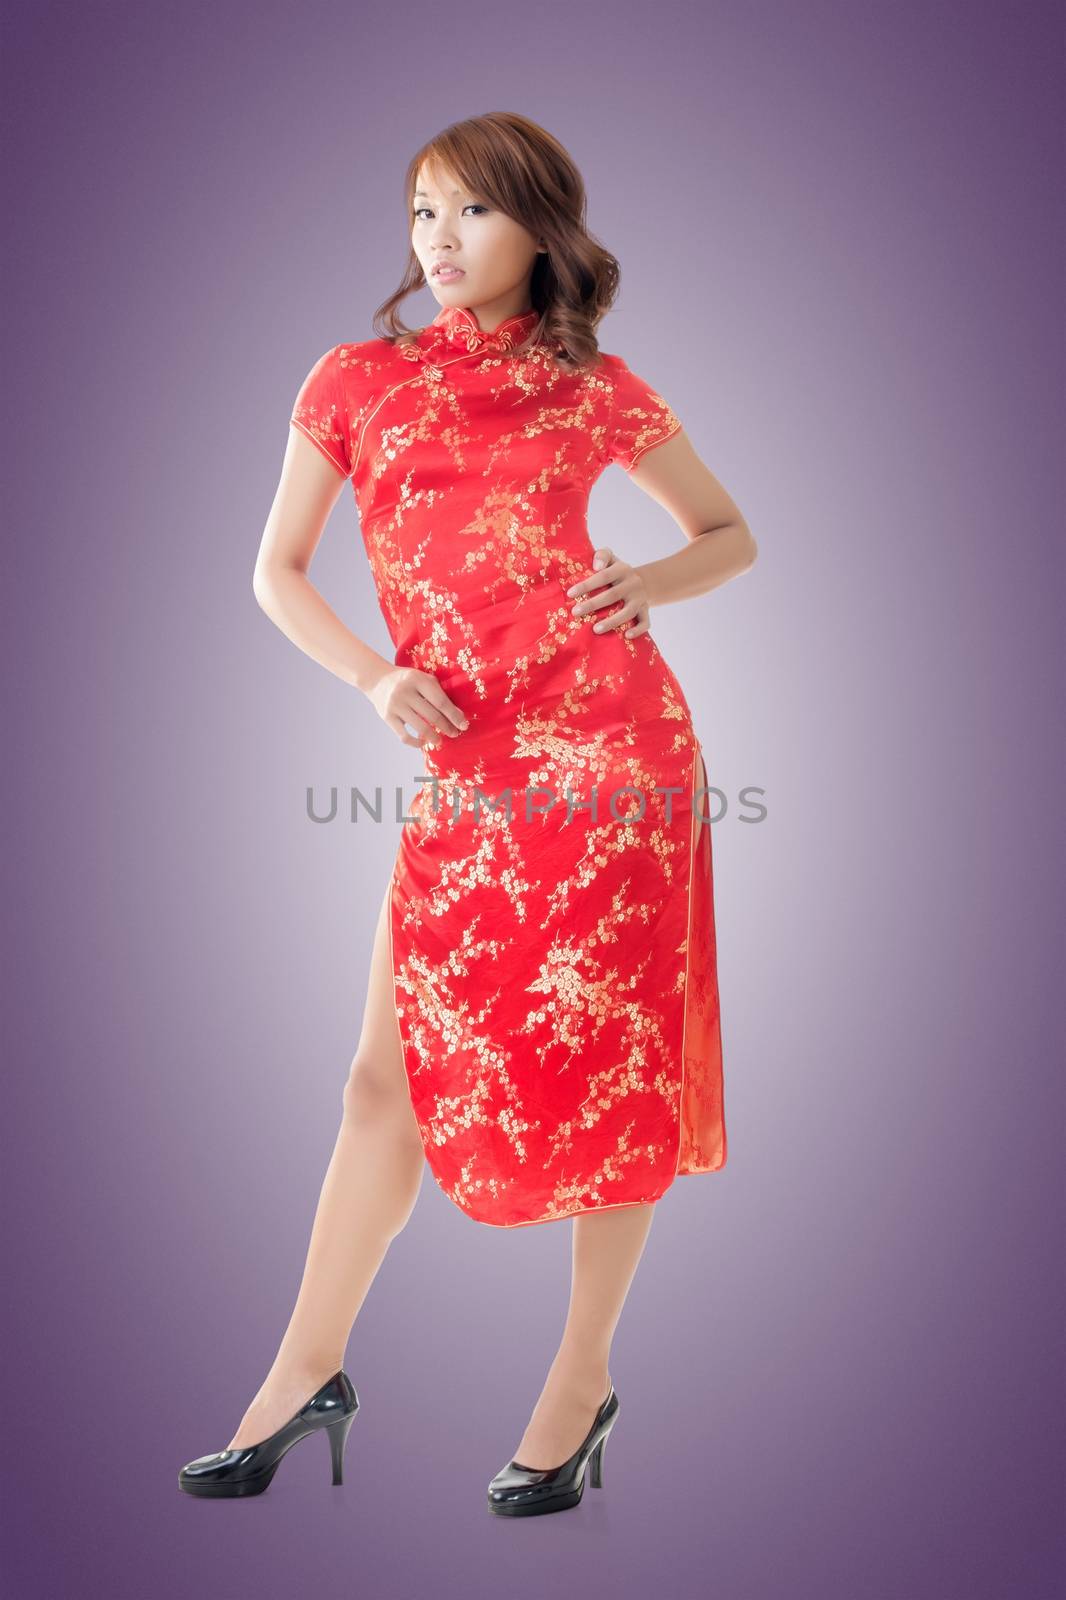 Chinese woman dress traditional cheongsam at New Year, full length portrait isolated.